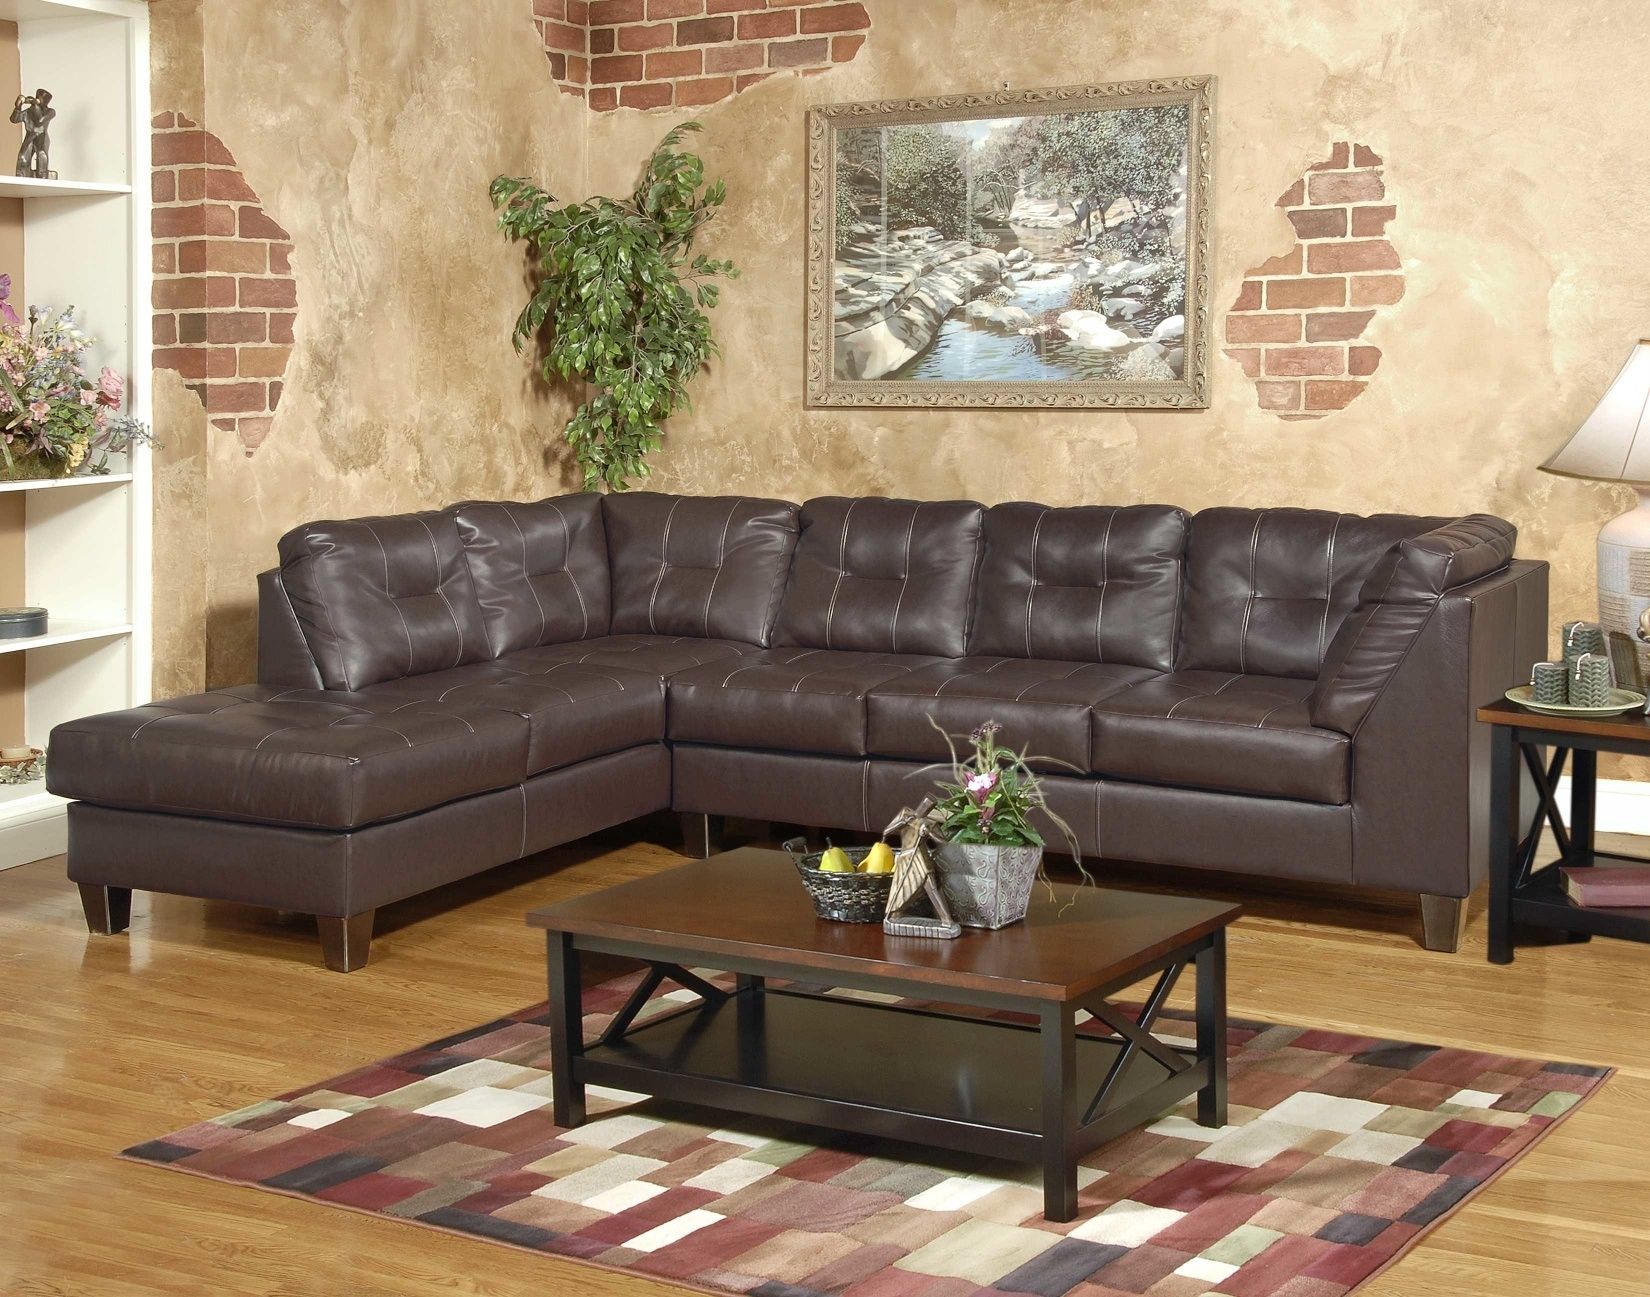 Discount Furniture And Mattresses – Tallahassee Furniture Direct With Regard To Tallahassee Sectional Sofas (Photo 7 of 10)